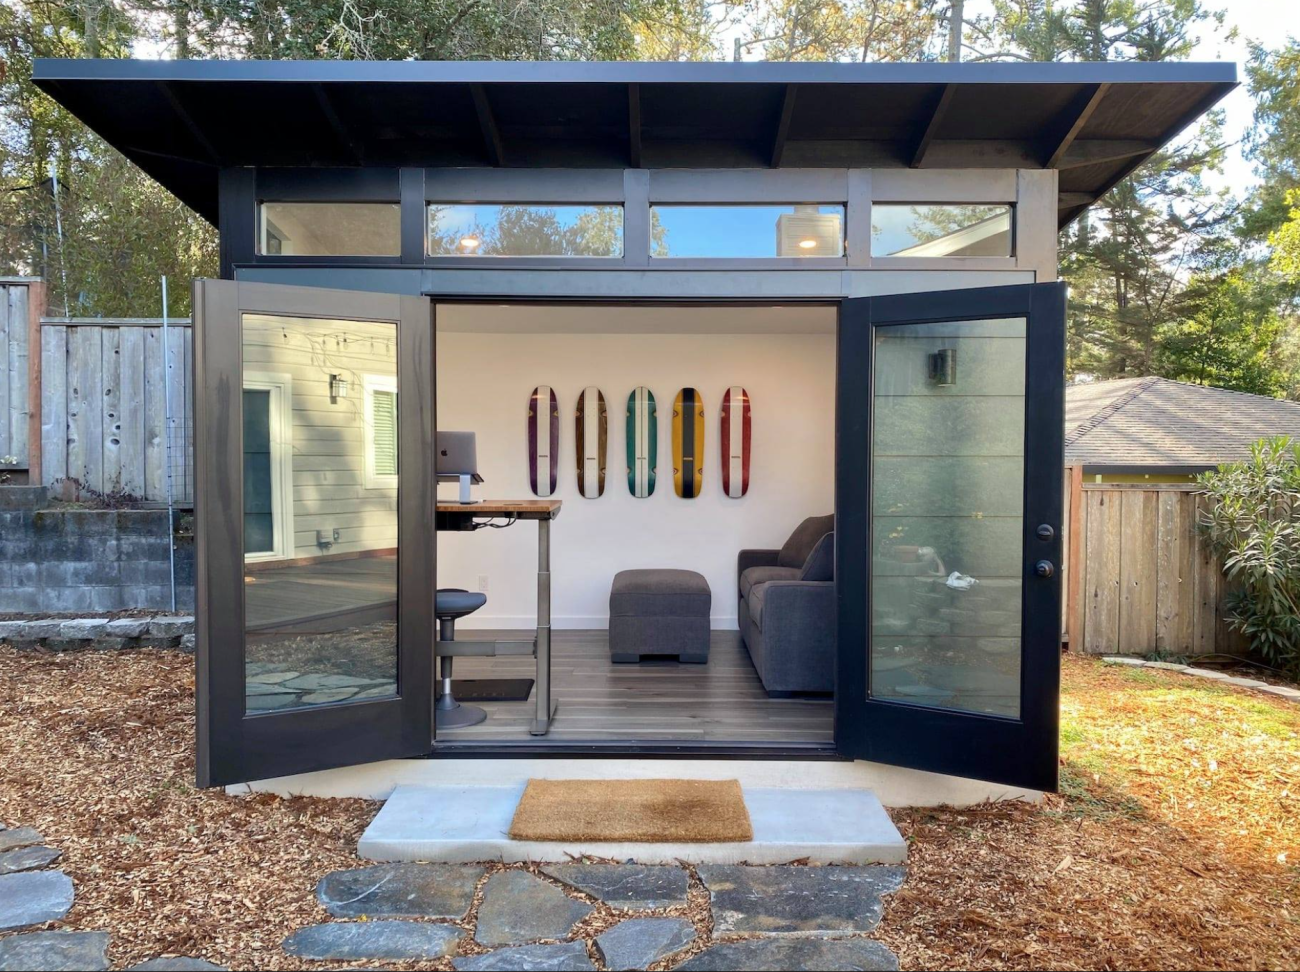 Home office set up in a garden studio with double glass door, workbench-style table, sofa and ottoman, skateboards hanging on the wall